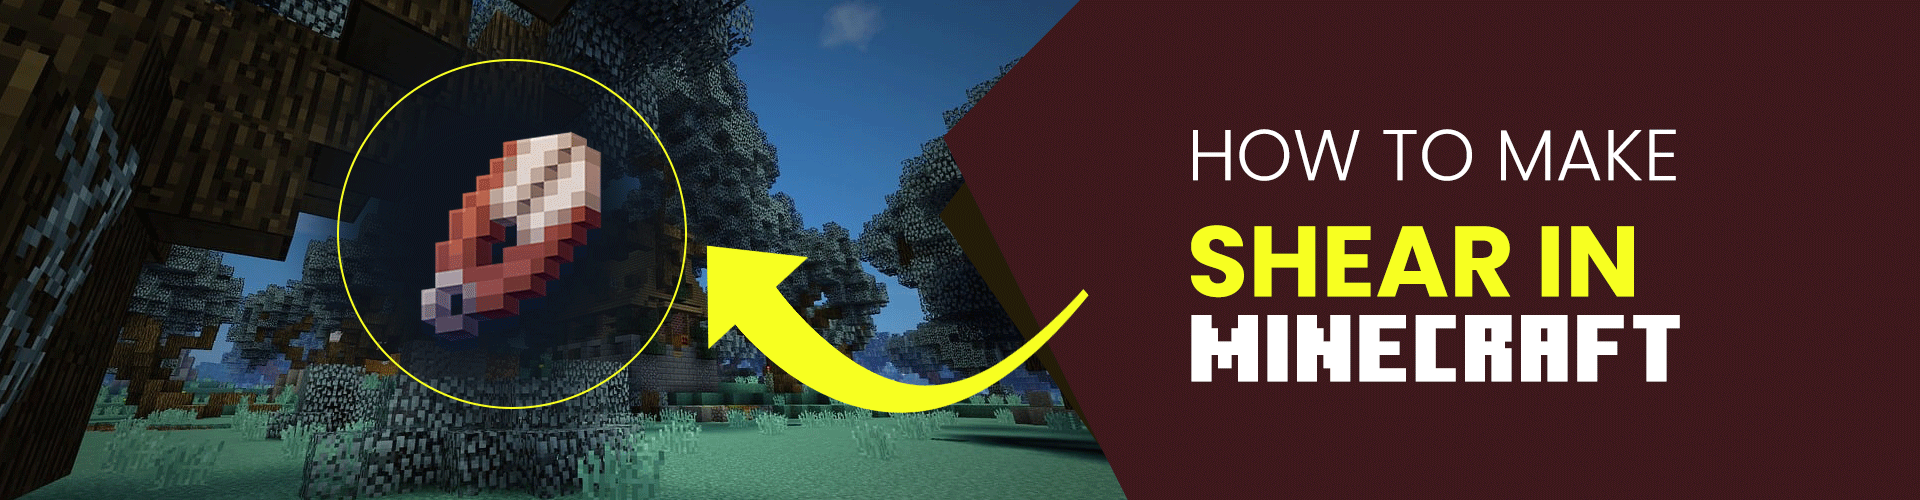 How to Make Shear in Minecraft